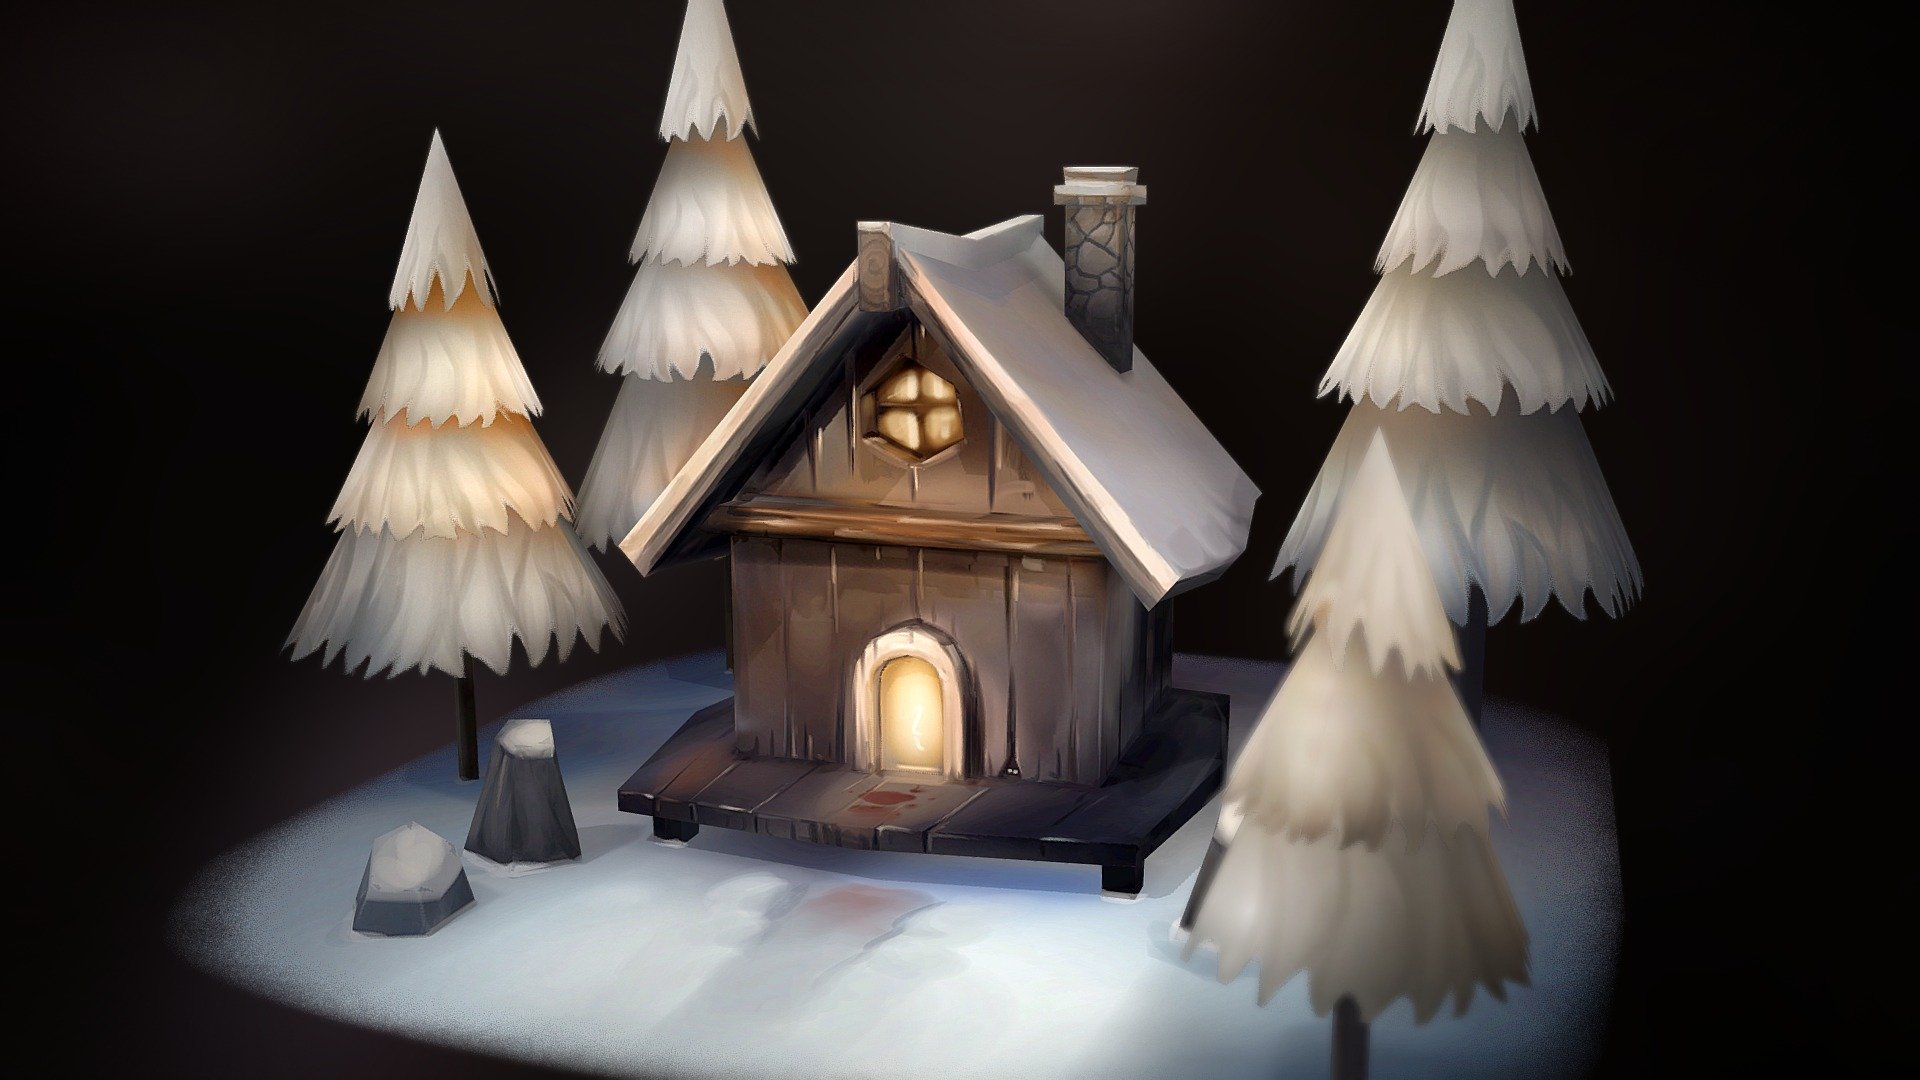 My entry for Hand painted Winter Scene challange. Made with Blender and Paintstorm. 
Based on &ldquo;Cottage UV